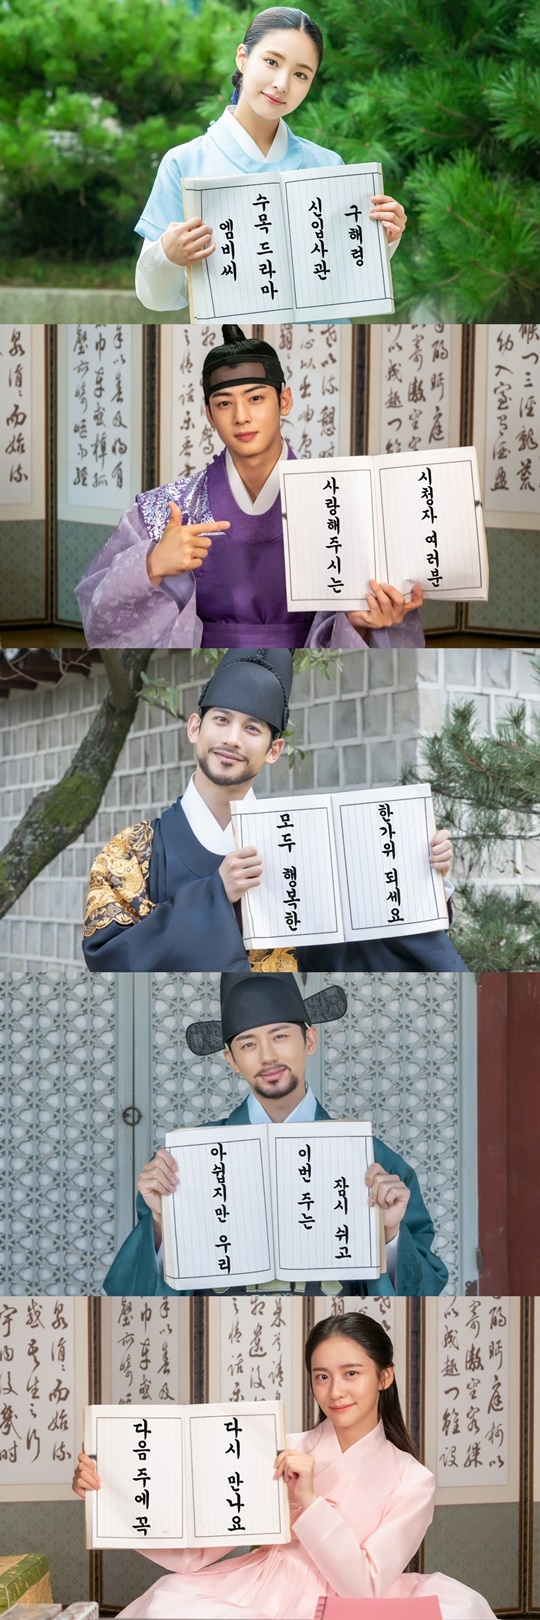 Shin Se-kyung, Jung Eun-woo, Park Ki-woong, Lee Ji-hoon and Park Ji-hyun delivered special Chuseok greetings to viewers.They are expecting to come to Kahaani, which is more abundant after happy Chuseok.MBC drama Na Hae-ryung released a video with SteelSeries with special Chuseok greetings of Actors on the 11th.Na Hae-ryung, starring Shin Se-kyung, Jung Eun-woo, and Park Ki-woong, is the first problematic woman in Joseon (Shin Se-kyung) and the Phil Chung of Prince Lee Rim (Jung Eun-woo) with the antiwar mother Solo. Only romance annals.Lee Ji-hoon, Park Ji-hyun and other young actors such as Kim Ji-jin, Kim Min-sang, Choi Duk-moon and Sung Ji-ru are all out.Five leading figures from the new employee, Na Hae-ryung, greeted viewers ahead of the Chuseok holiday.The SteelSeries released a book and said, All viewers who love MBC drama new recruits Na Hae-ryung, please send a happy party!Unfortunately, we will rest for a while this week and meet again next week. Shin Se-kyung, who is wearing a blue military uniform and boasts a refreshing charm, said, I am taking a pleasant picture of the love and support you send. He also said, I hope you have a happy holiday.Then, Jung Eun-woo, who rang viewers with sad Confessions on the show last week, caused the hearts of those who saw it with a thrilling smile.Well come to a rich holiday and well come to a rich story, he said, raising expectations for next weeks broadcast.Park Ki-woong also laughed at those who said, I hope you have a good time with your family in the national holiday, showing off the charm of soft reversal, unlike the charismatic appearance in the play.Lee Ji-hoon also said, Unlike the blunt officer Min Woo-won, he gave a pleasant Chuseok greeting with a playful appearance. He said, I started shooting in hot summer, but it is Chuseok.I hope you have a good time with your family.  Please love Na Hae-ryung! Finally, Park Ji-hyun caught his eye with a beautiful uniform, not a military uniform.She said with a sweet smile, I will be very sorry for the Chuseok holiday, but I would like to ask for more love and support next week.In the 29-32 episode of the new cadet last week, Na Hae-ryung and Irim, who faced a romance crisis due to the sudden preparation of the wedding ceremony, were portrayed.Na Hae-ryung finally rejected Irims love Confessions, and the two of them were excited by each others mixed hearts and stimulated the tears of viewers.Among them, the Seoraewon incident 20 years ago is gradually revealed on the surface of the water, and interest in Kahaani is increasing in the future.The 33-34 Newcomer, Na Hae-ryung, starring Shin Se-kyung, Jung Eun-woo and Park Ki-woong, will be broadcast at 8:55 pm on Wednesday, the 18th due to the Chuseok holiday break.